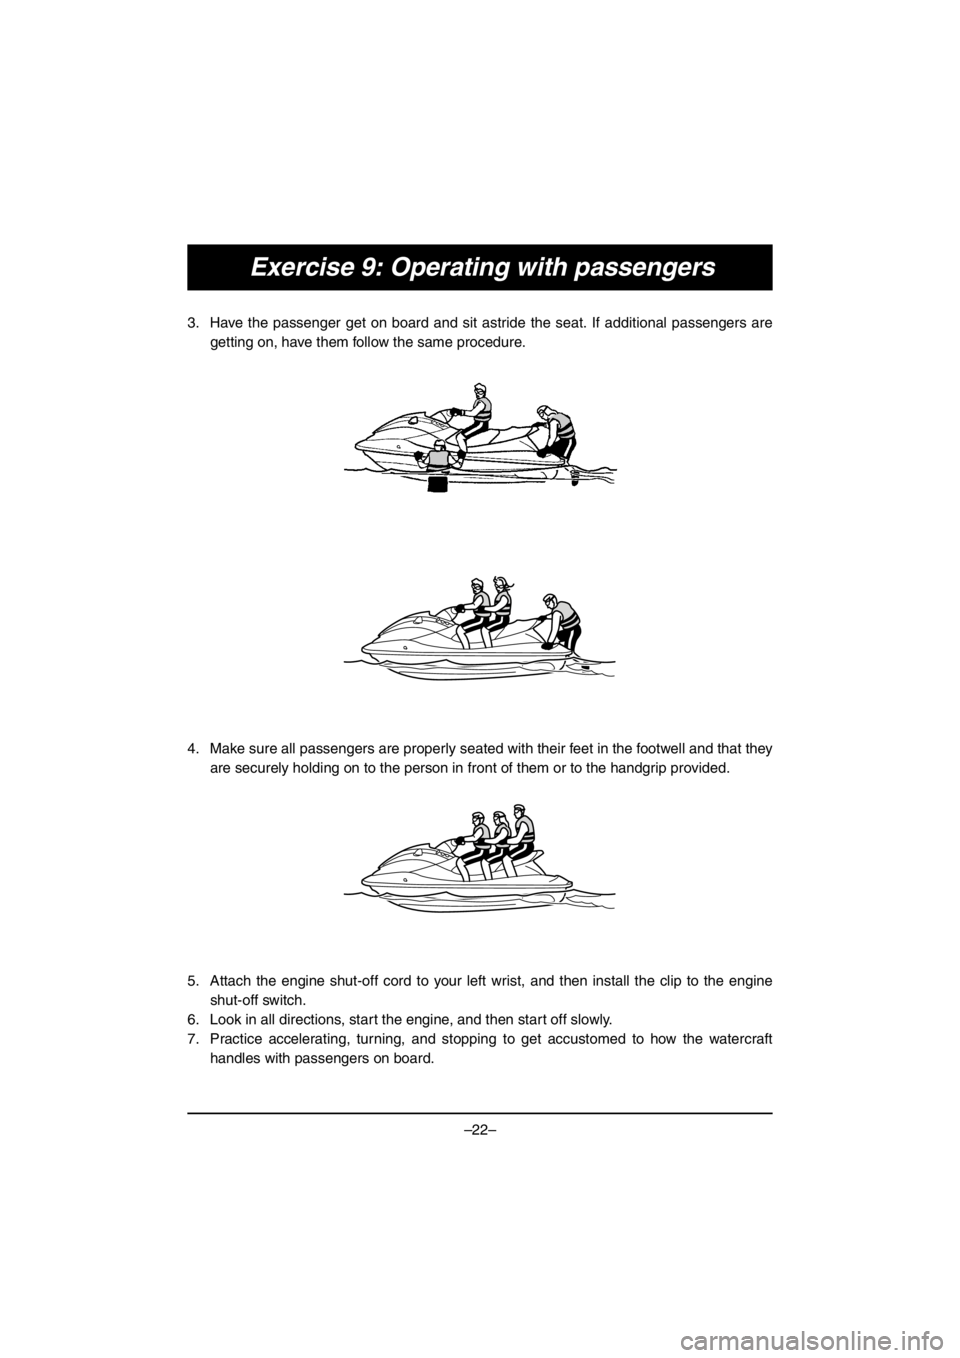 YAMAHA EX SPORT 2017  ΟΔΗΓΌΣ ΧΡΉΣΗΣ (in Greek) –22–
Exercise 9: Operating with passengers
3. Have the passenger get on board and sit astride the seat. If additional passengers are
getting on, have them follow the same procedure. 
4. Make sure 